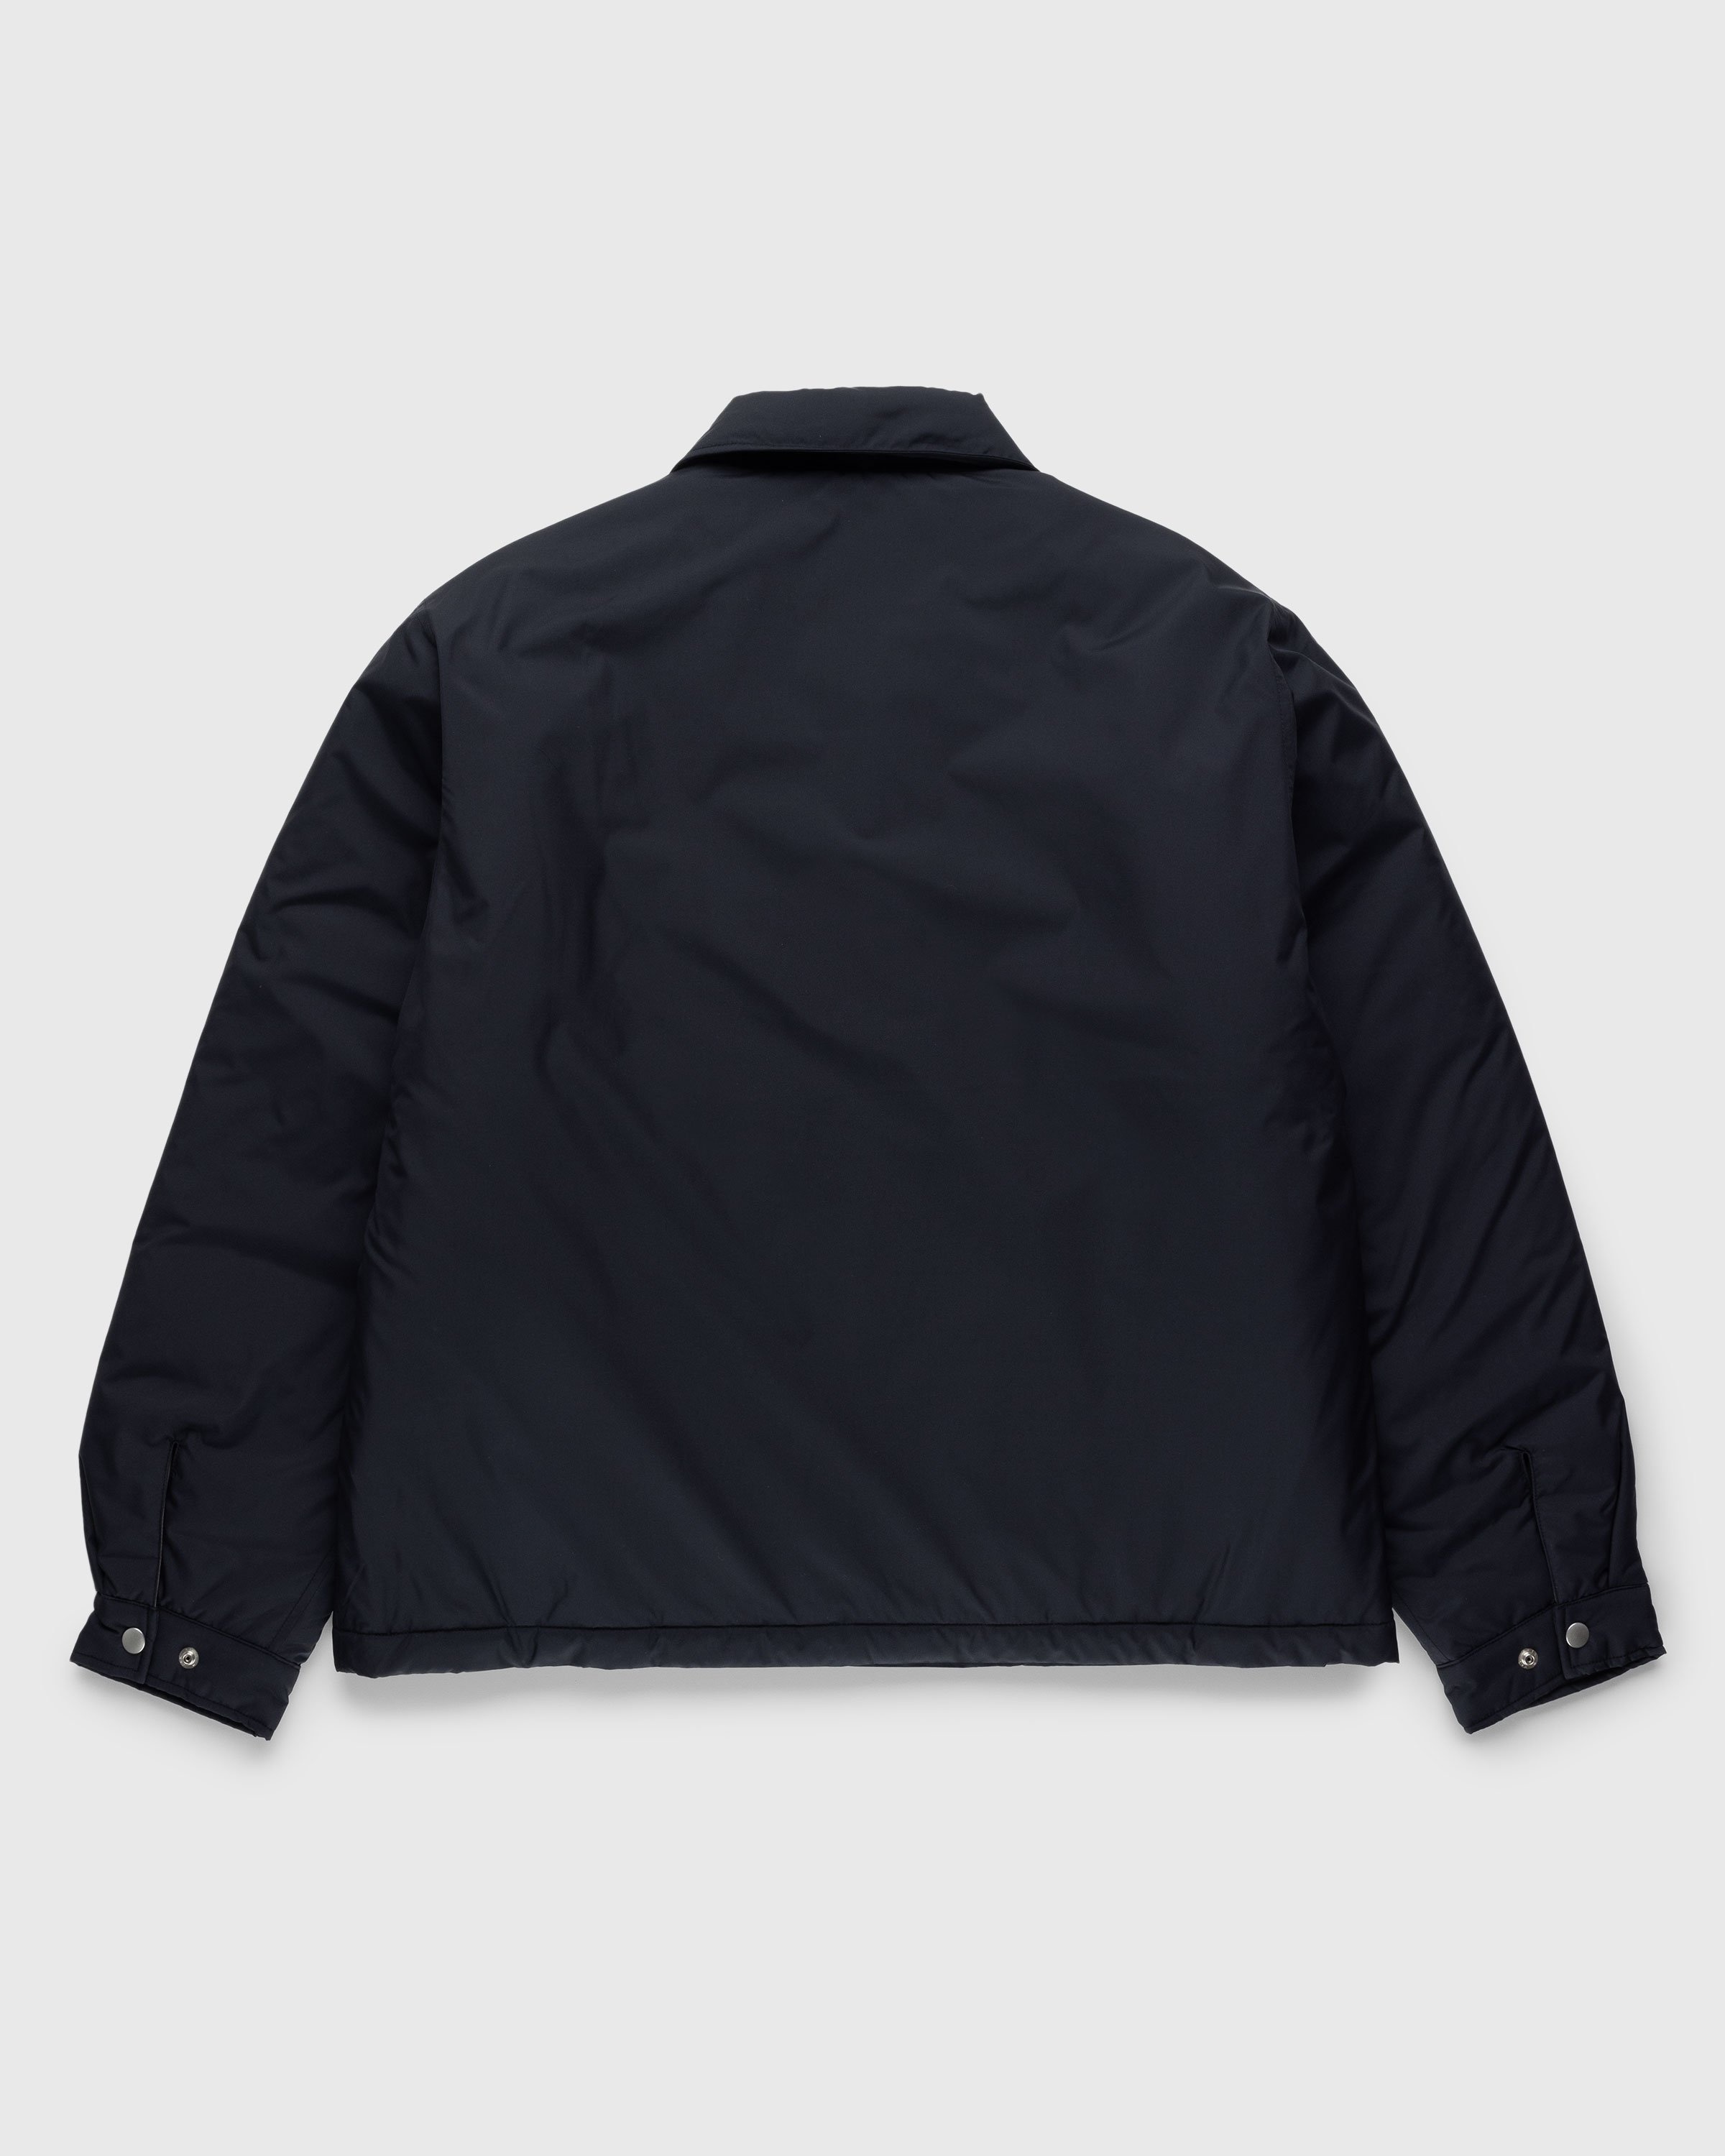 Highsnobiety HS05 – Light Insulated Eco-Poly Jacket Black - Outerwear - Black - Image 2